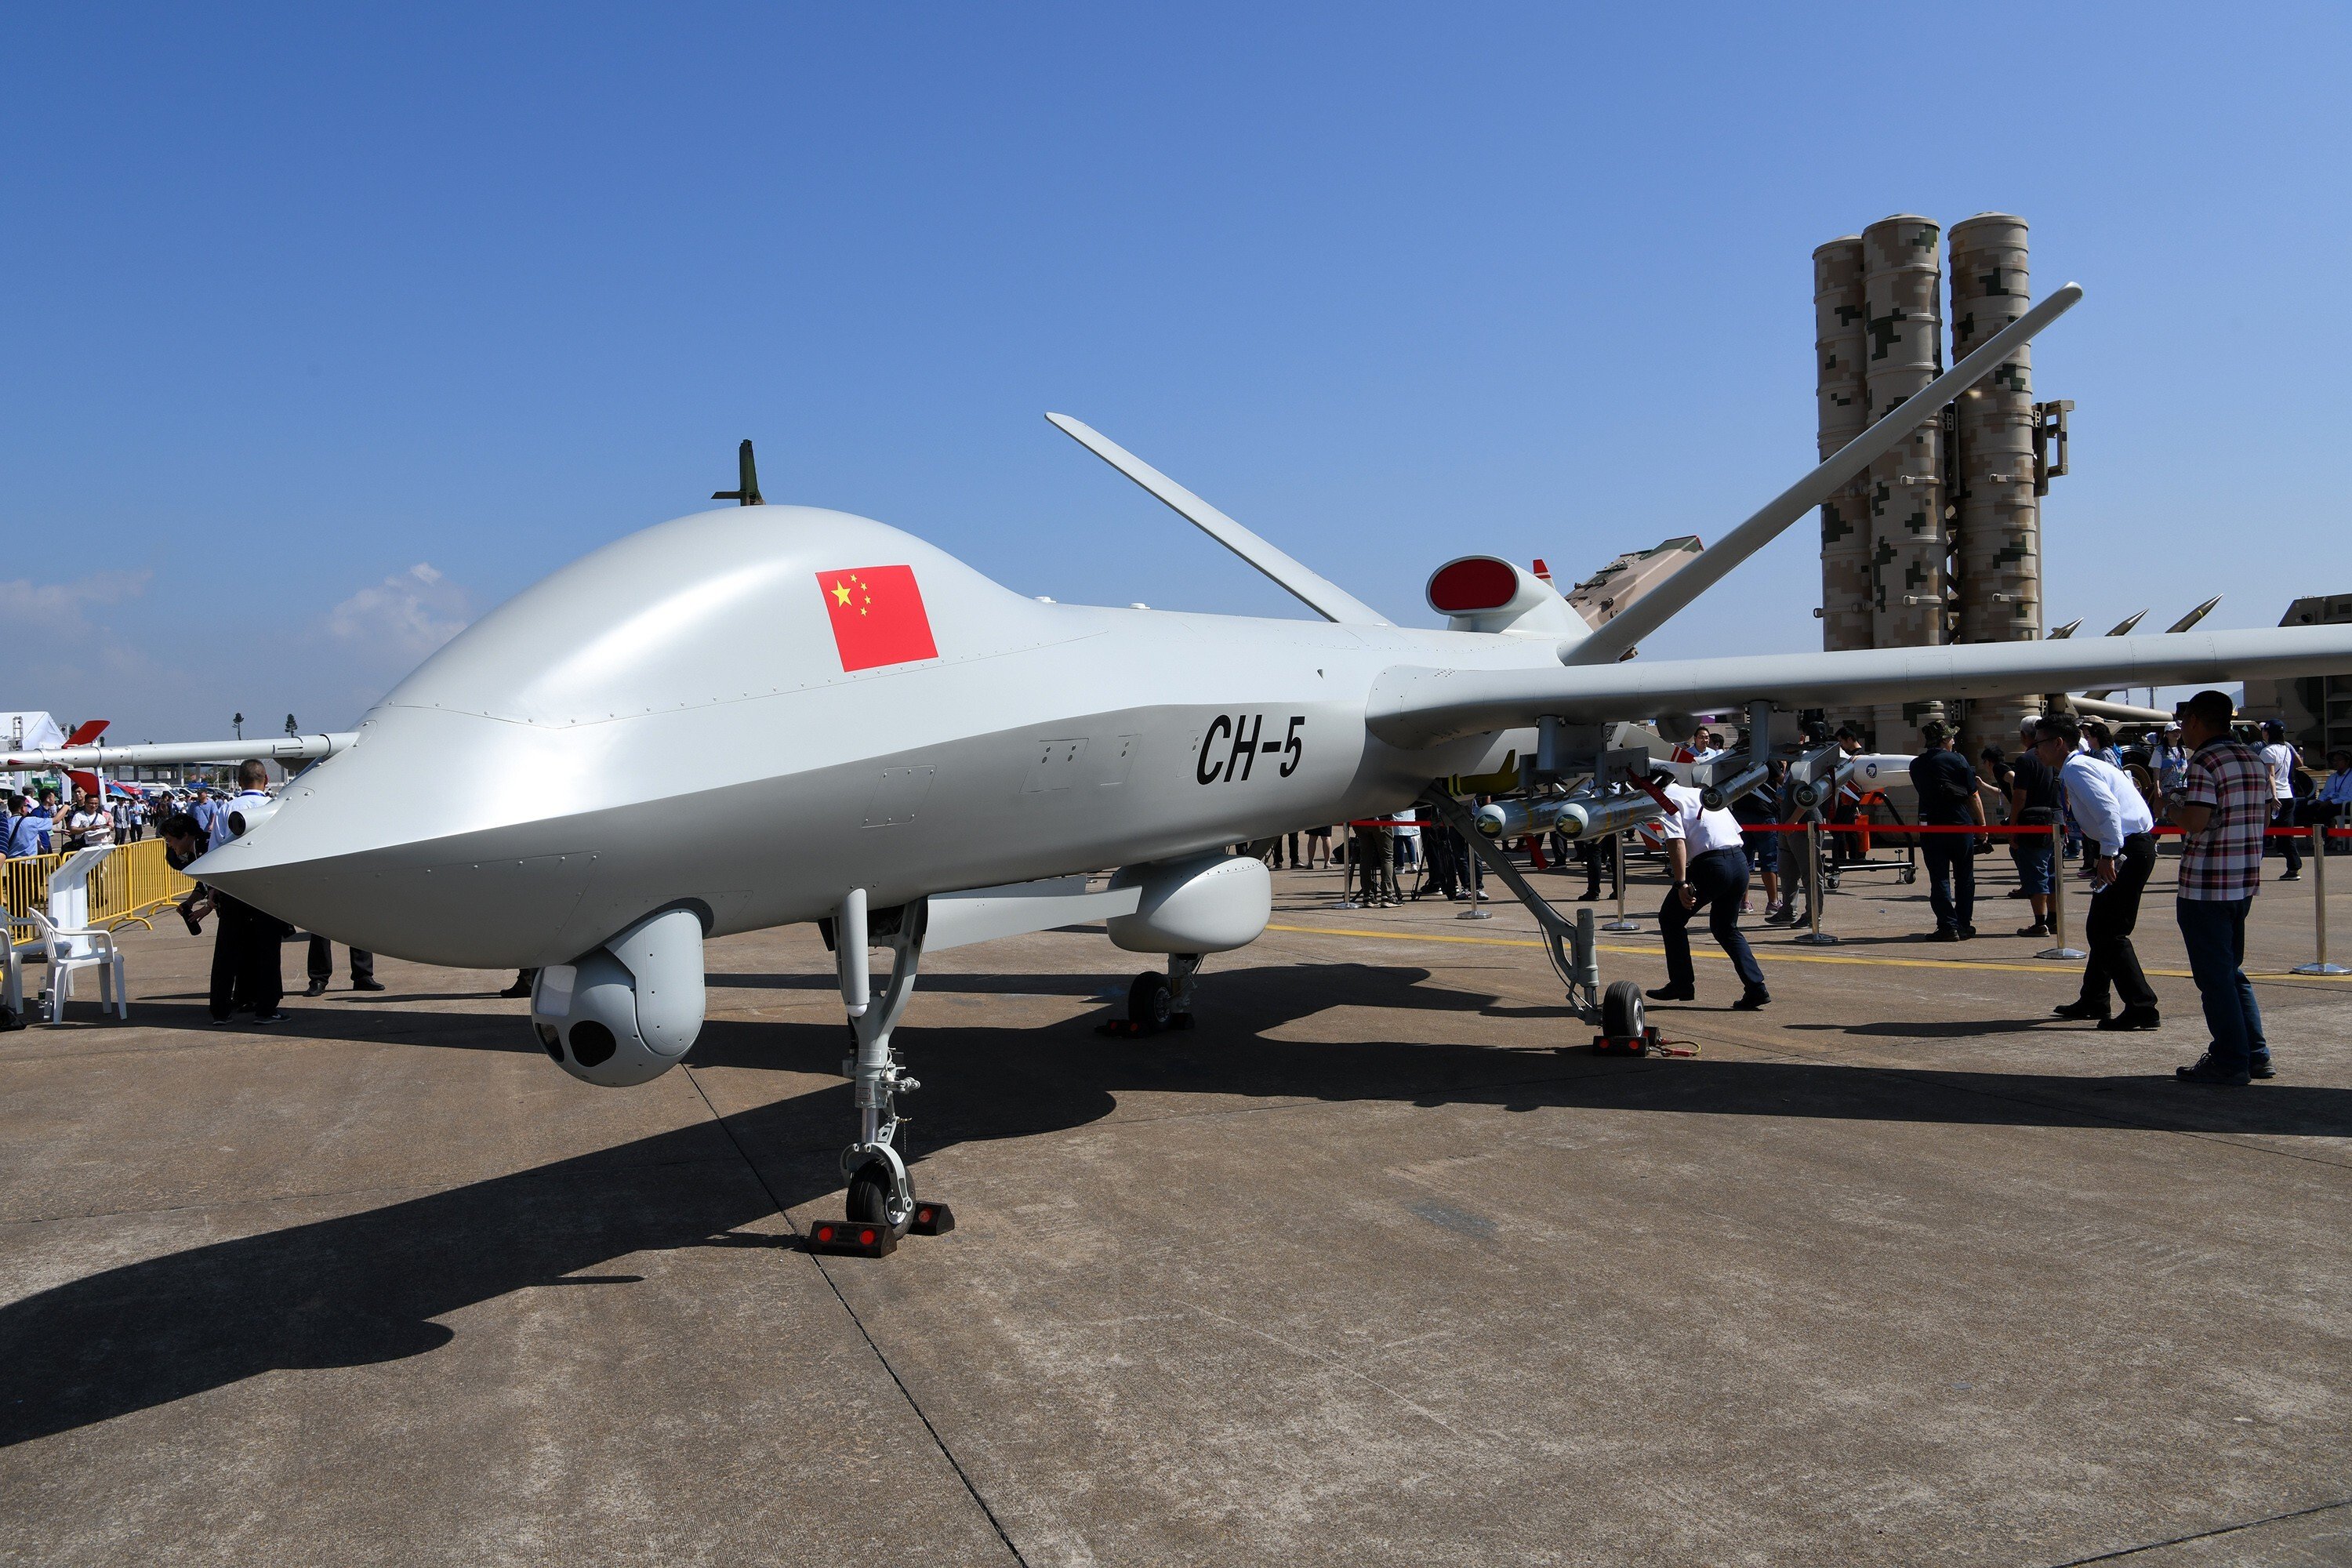 An unmanned aerial vehicle, the Rainbow 5, is displayed at an air show in Zhuhai. File photo: Xinhua